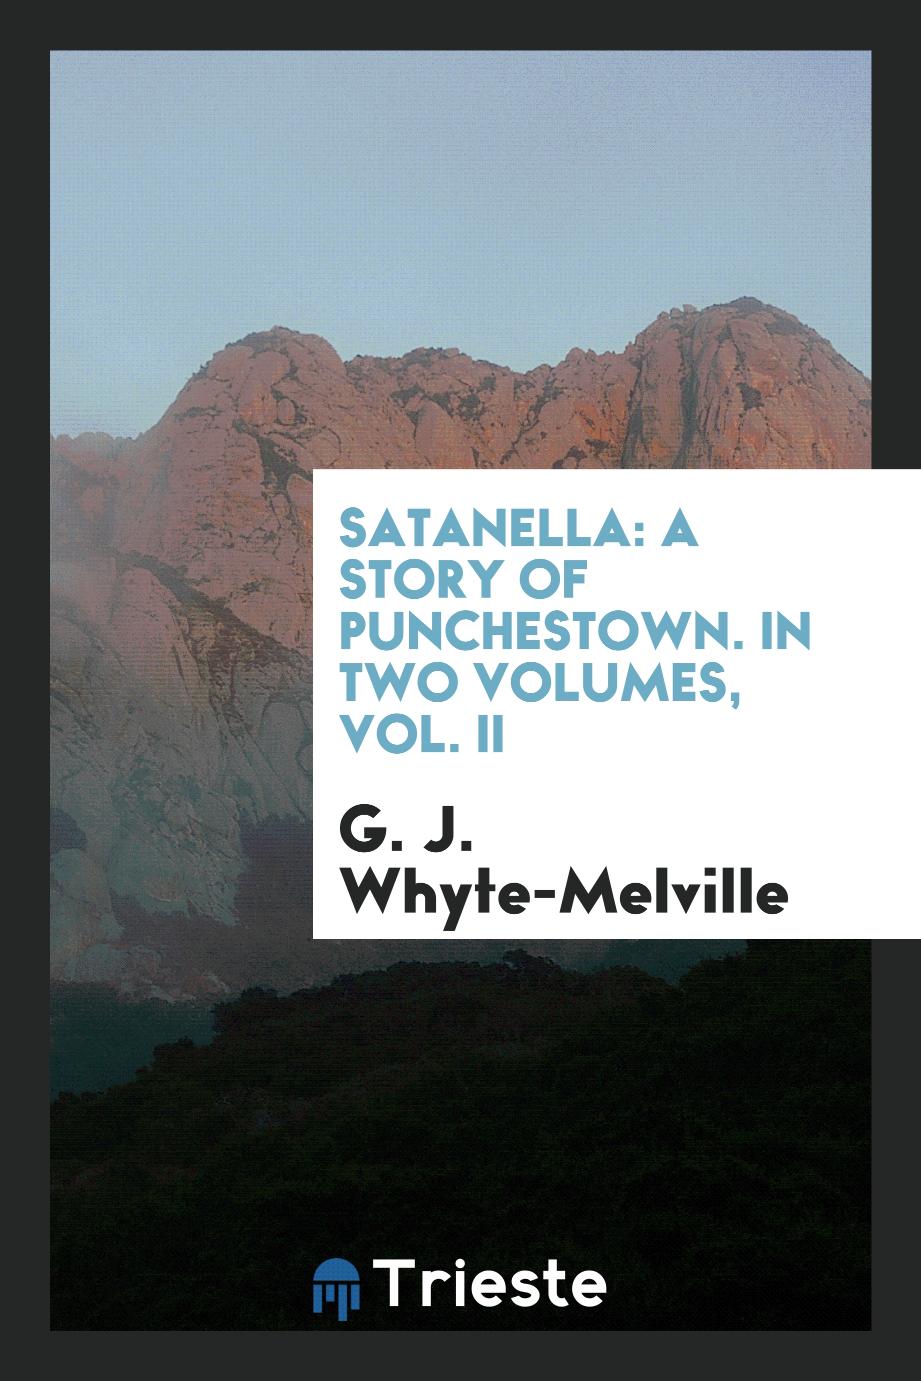 Satanella: a story of Punchestown. In two volumes, vol. II